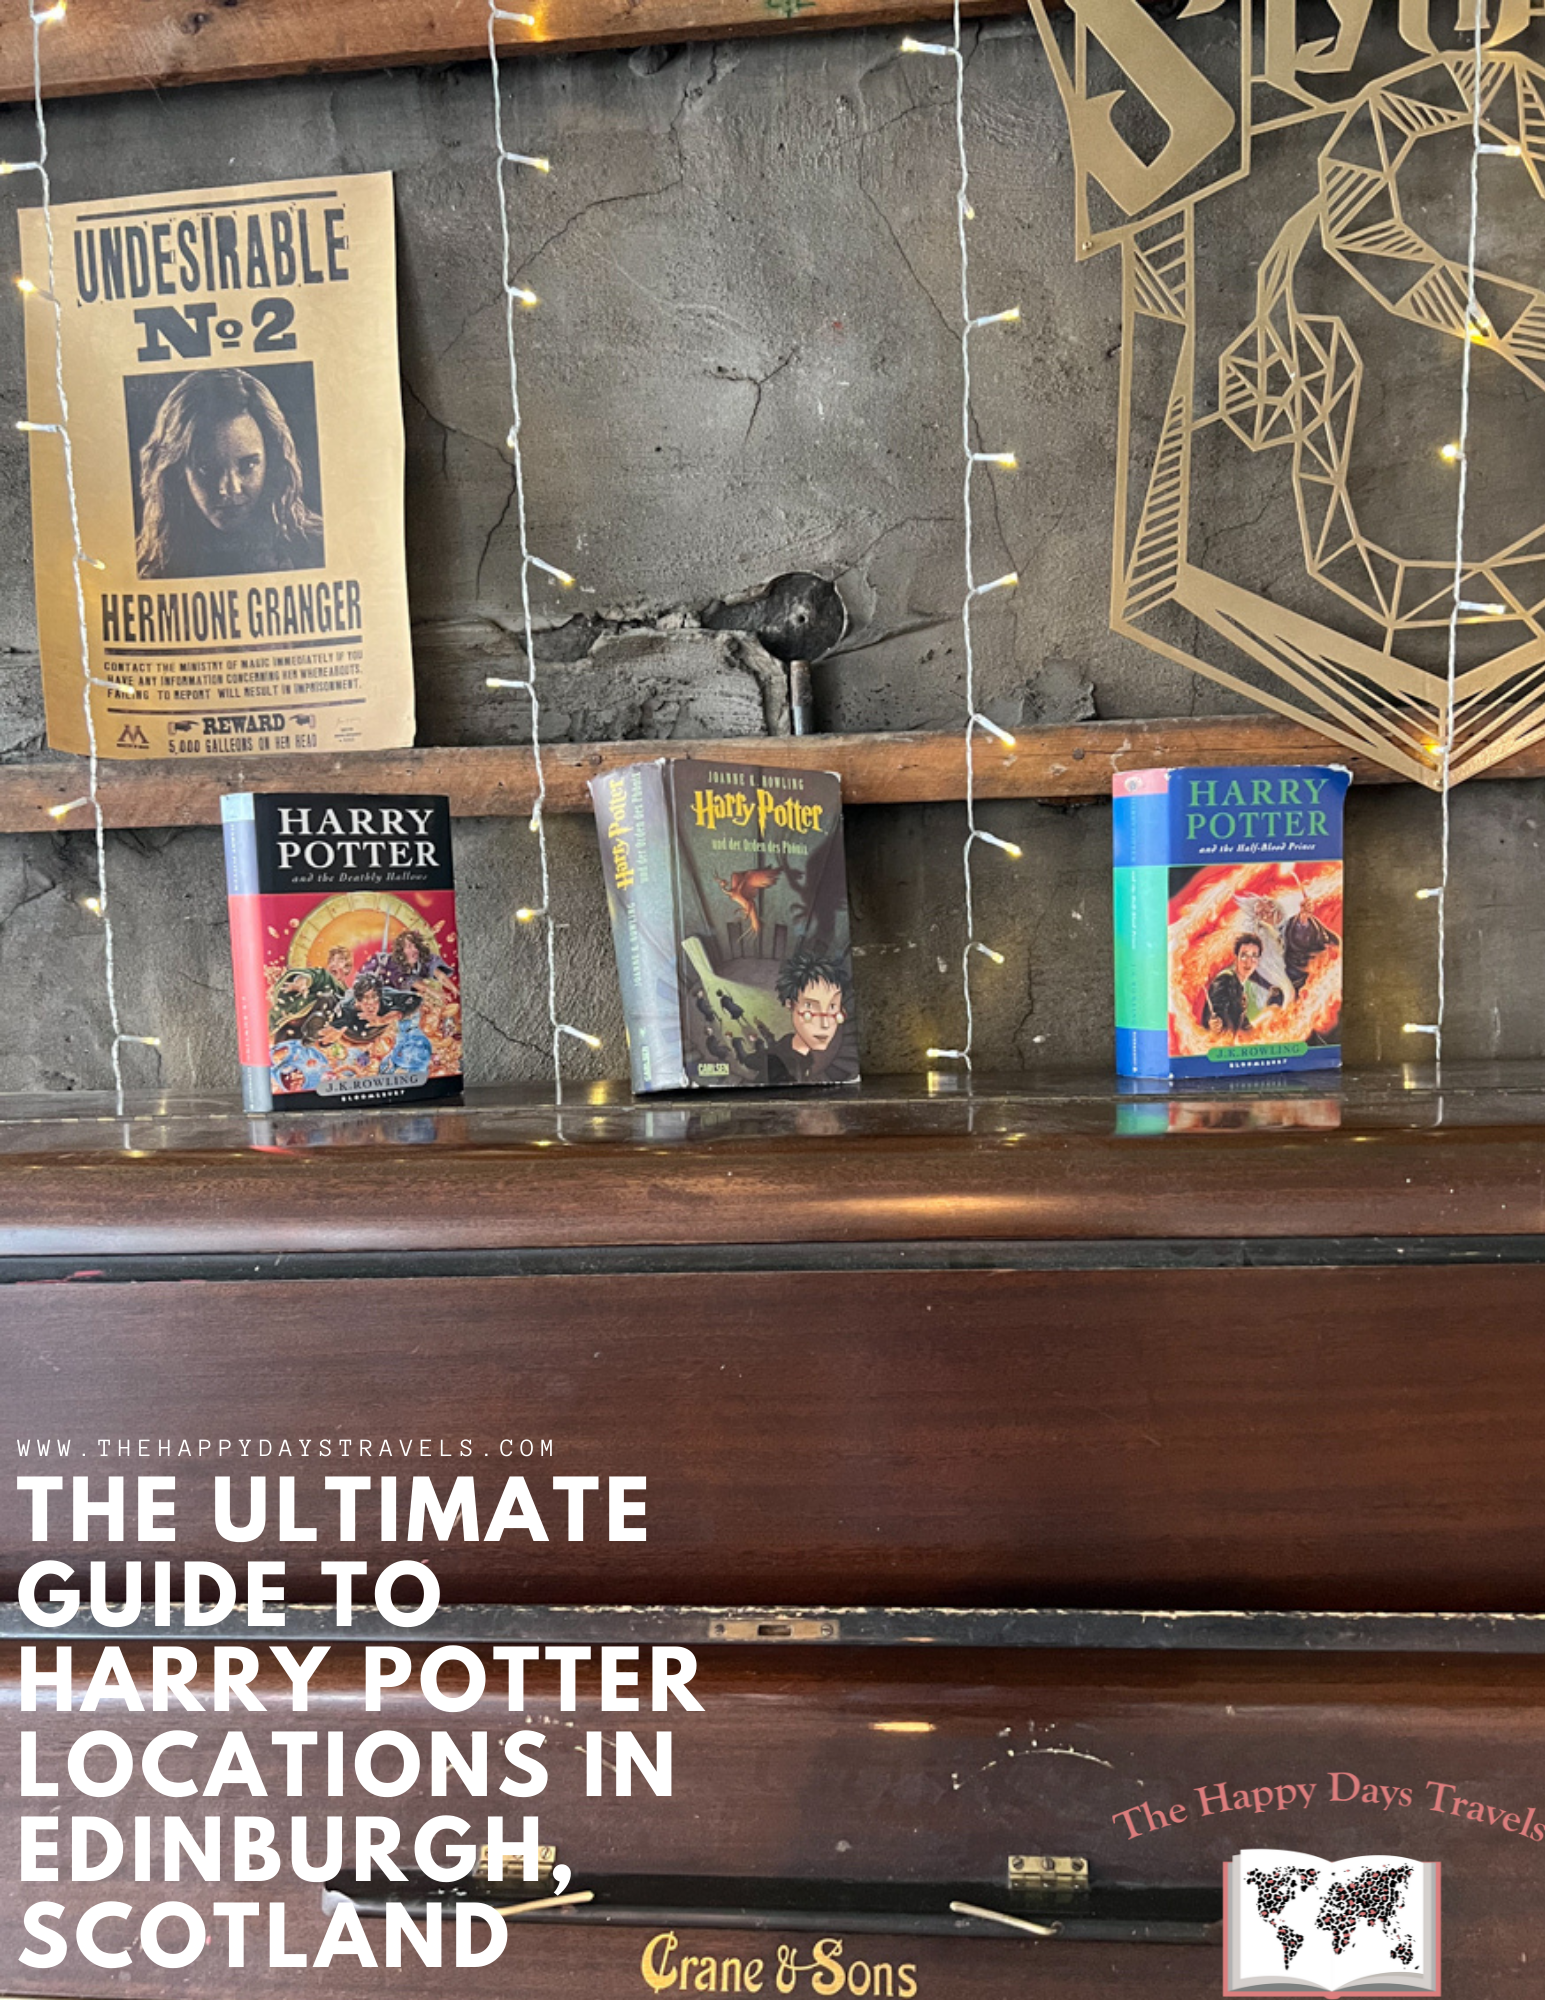 Pin image for 'The Ultimate Guide to Harry Potter Locations in Edinburgh, Scotland' with HP books on a piano picture from Nicolsons Cafe in Edinburgh